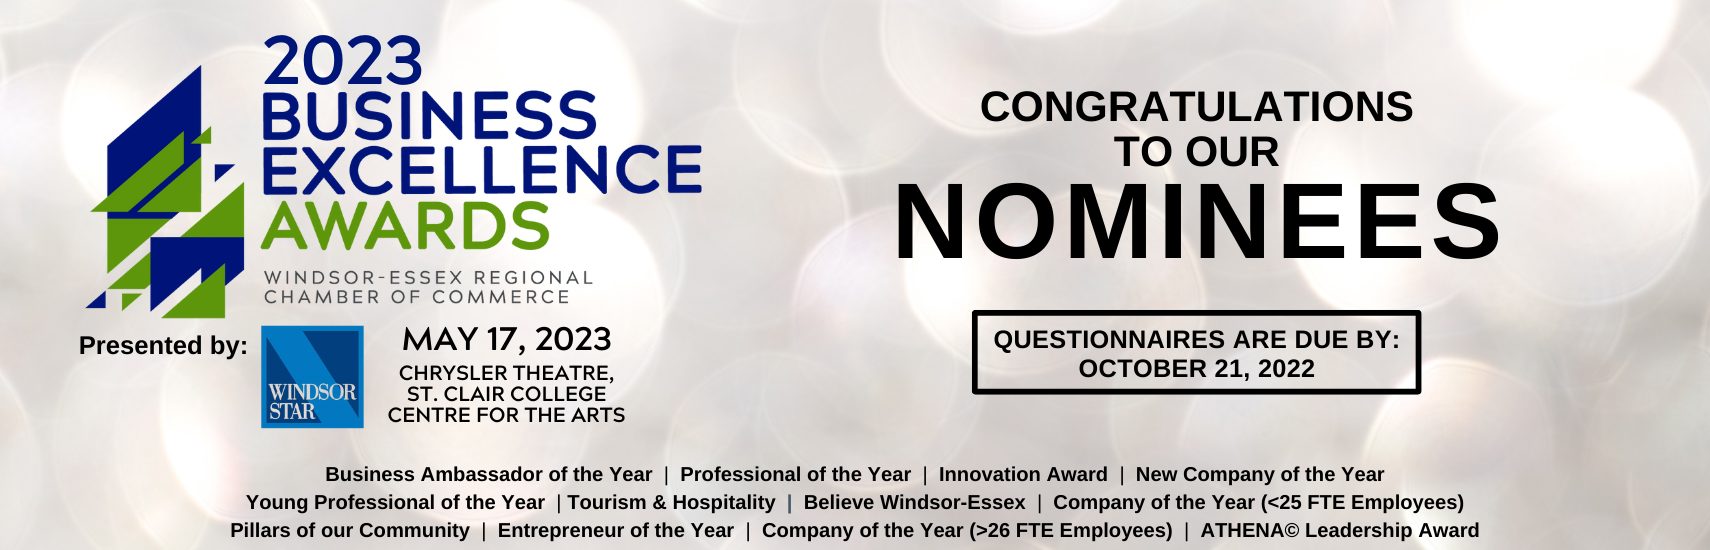 2023 Business Excellence Awards Categories WindsorEssex Reg. Chamber of Commerce